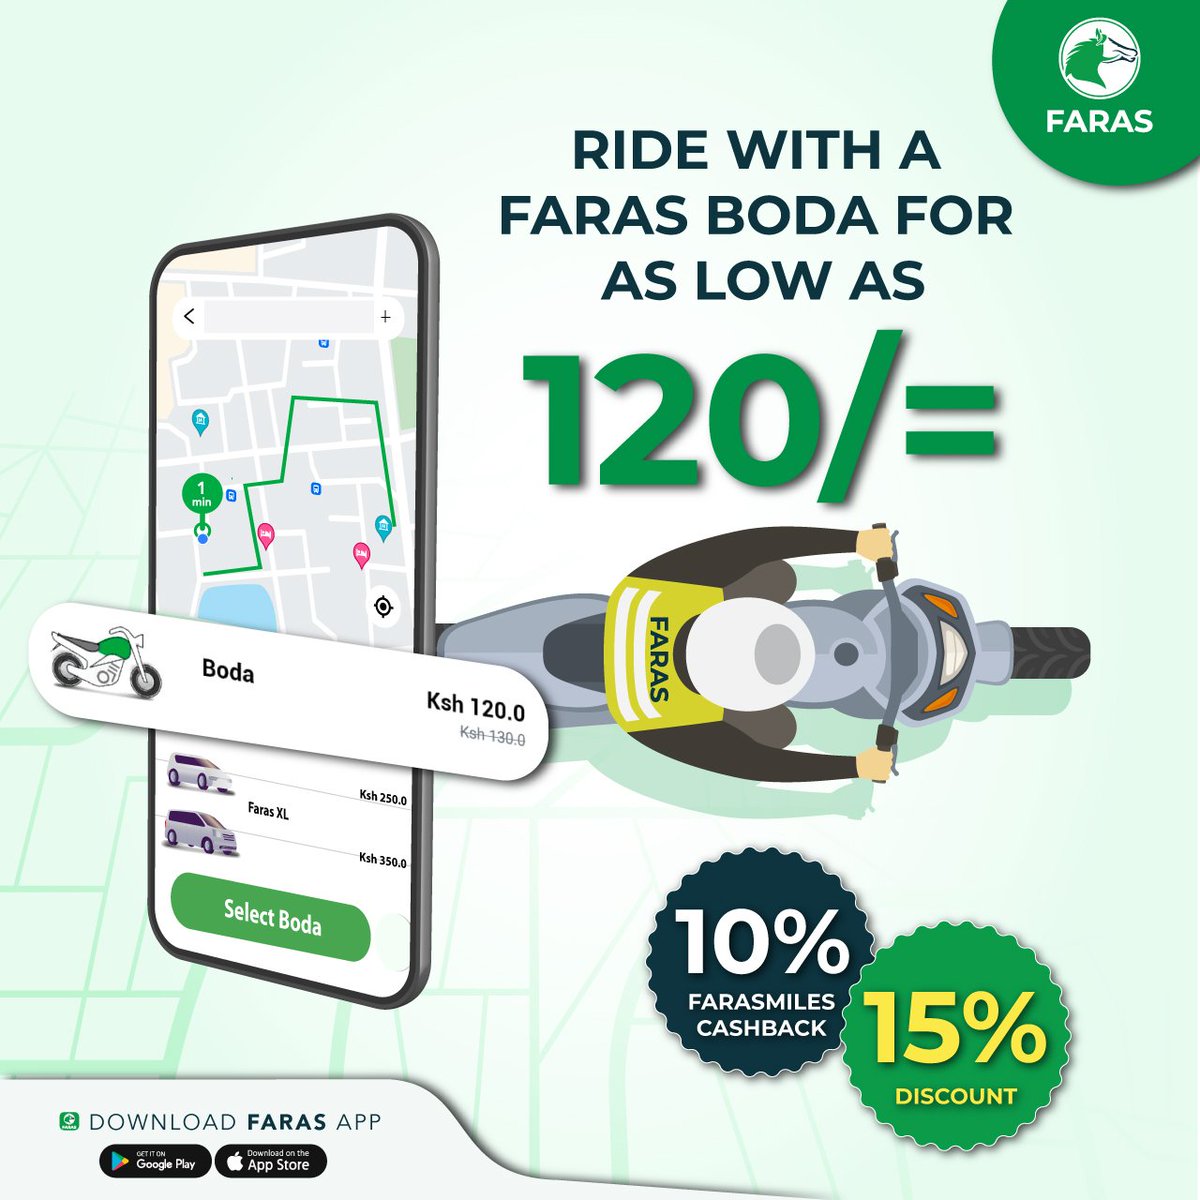 Ready to put your riding skills to good use? #WeekendNaFaras Join @farasKenya Boda as a captain and embark on a rewarding career journey. With the flexibility to choose your own schedule, competitive fares, and the opportunity to make a positive impact in your community,…